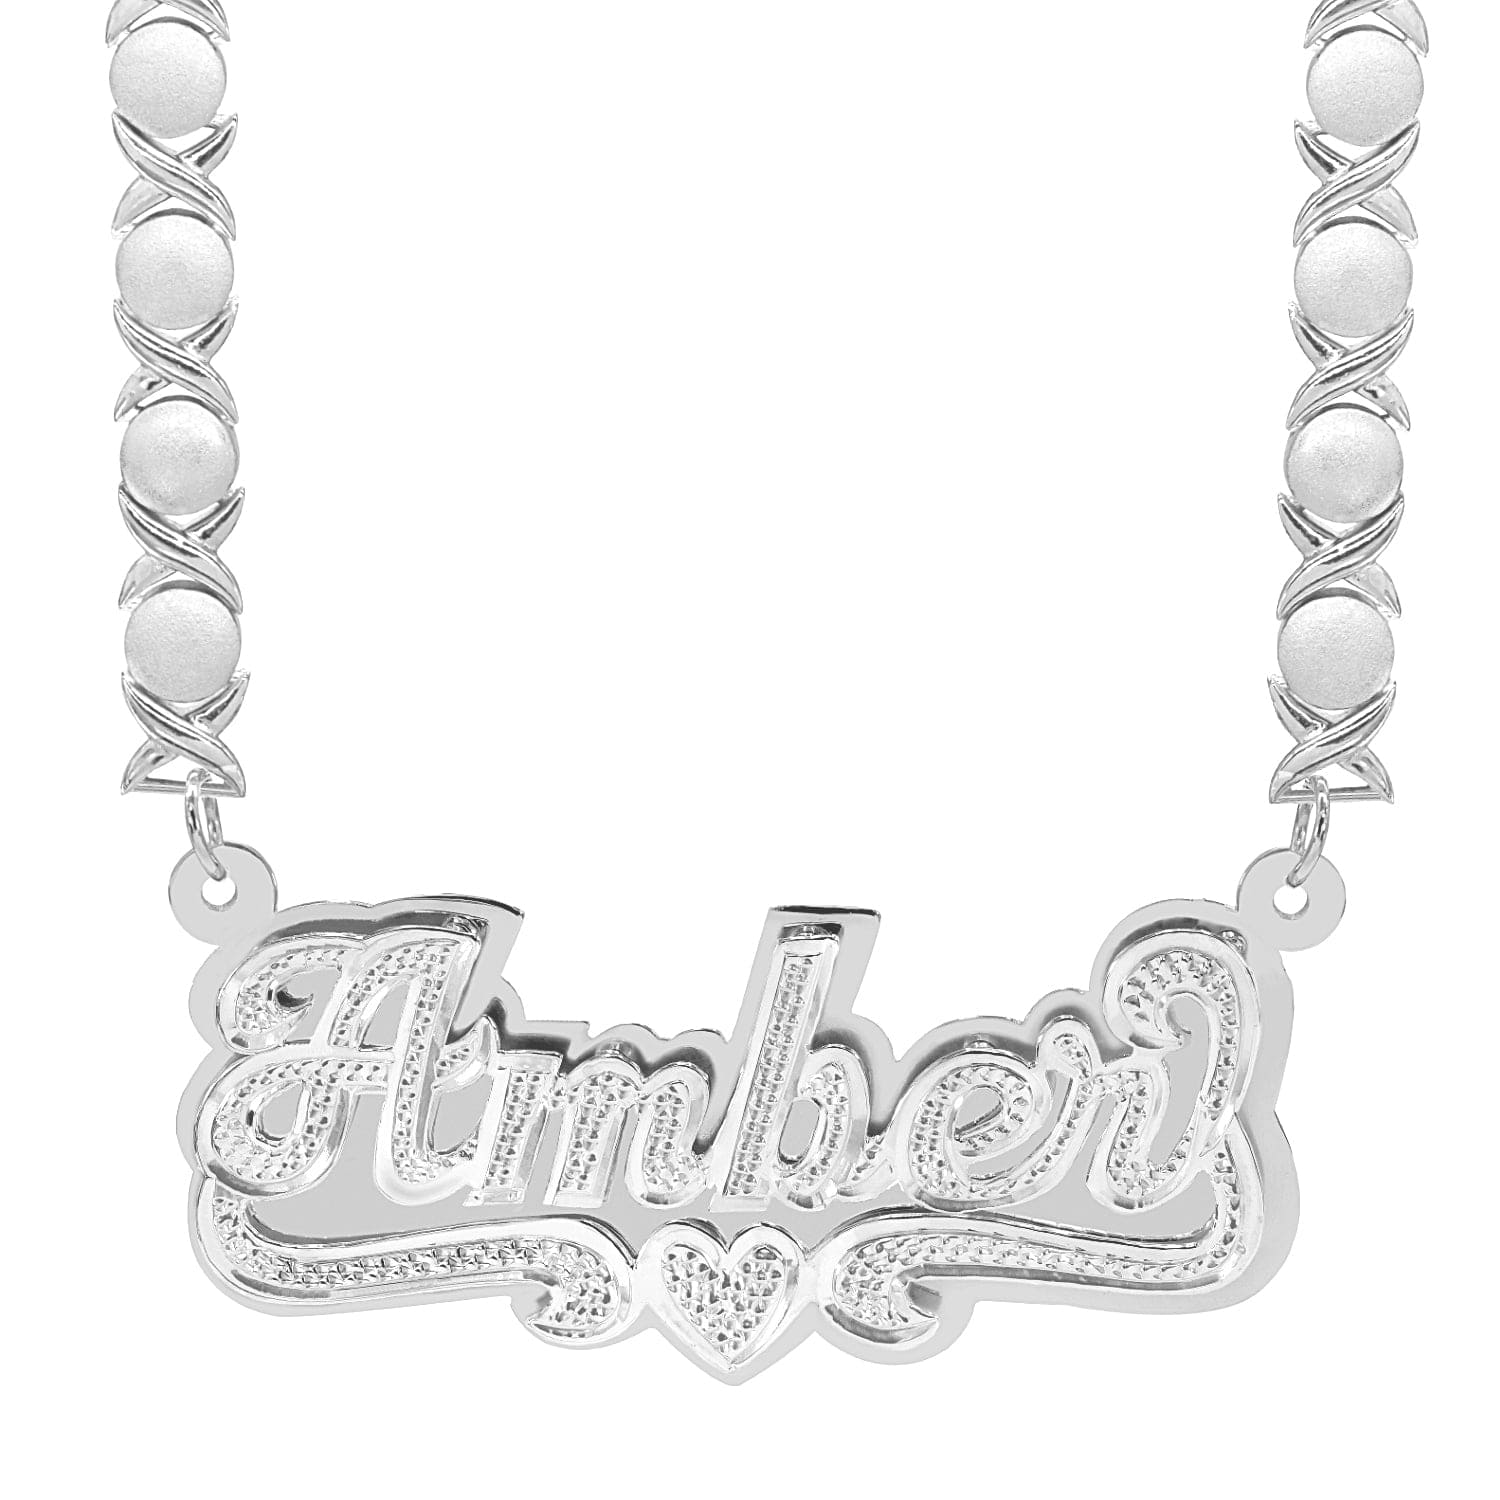 14K Gold over Sterling Silver / Rhodium Xoxo Chain Double Plated Name Necklace "Amber" with Rhodium Xoxo Chain